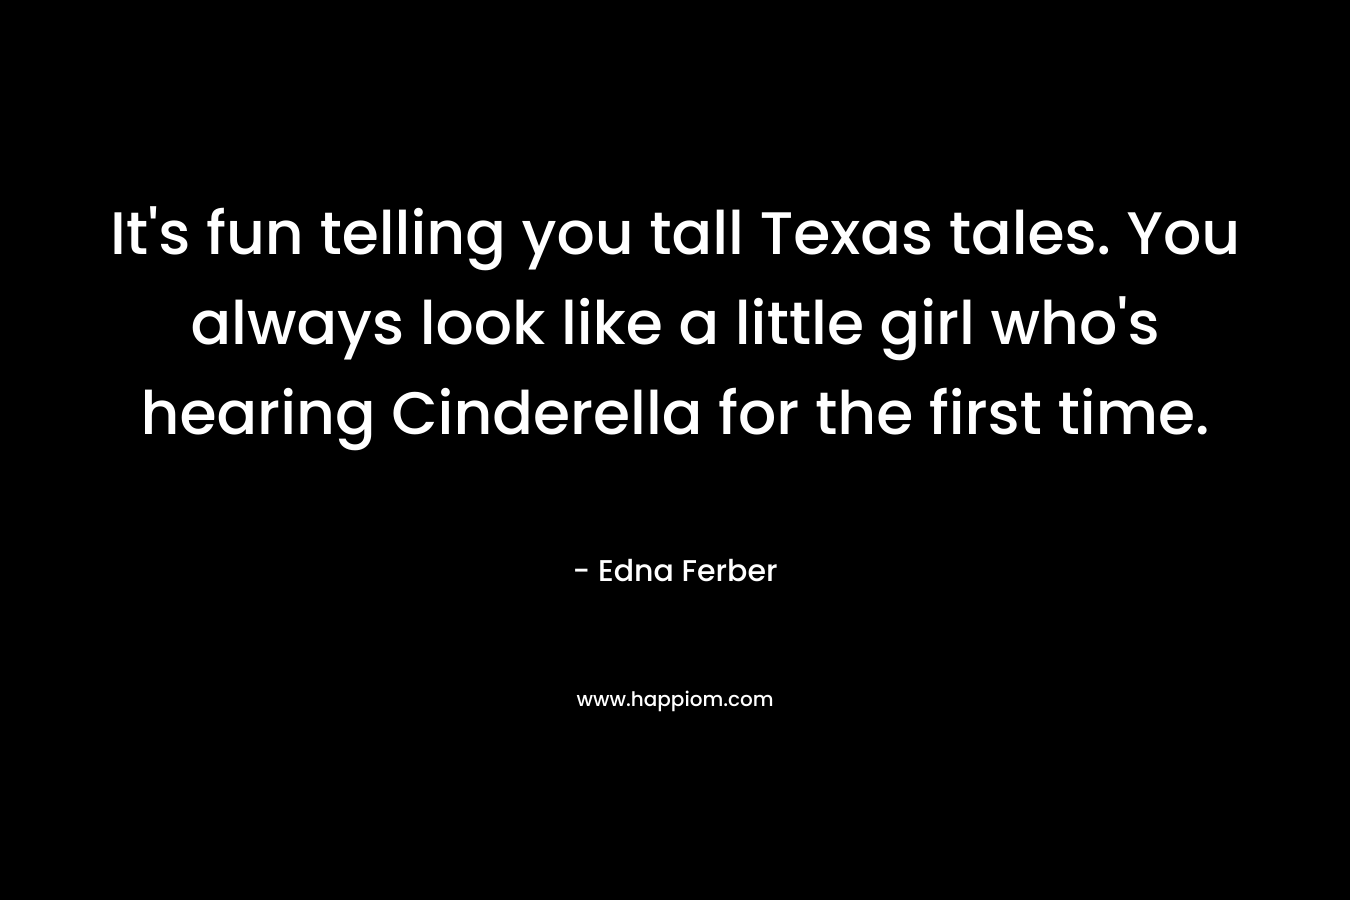 It's fun telling you tall Texas tales. You always look like a little girl who's hearing Cinderella for the first time.